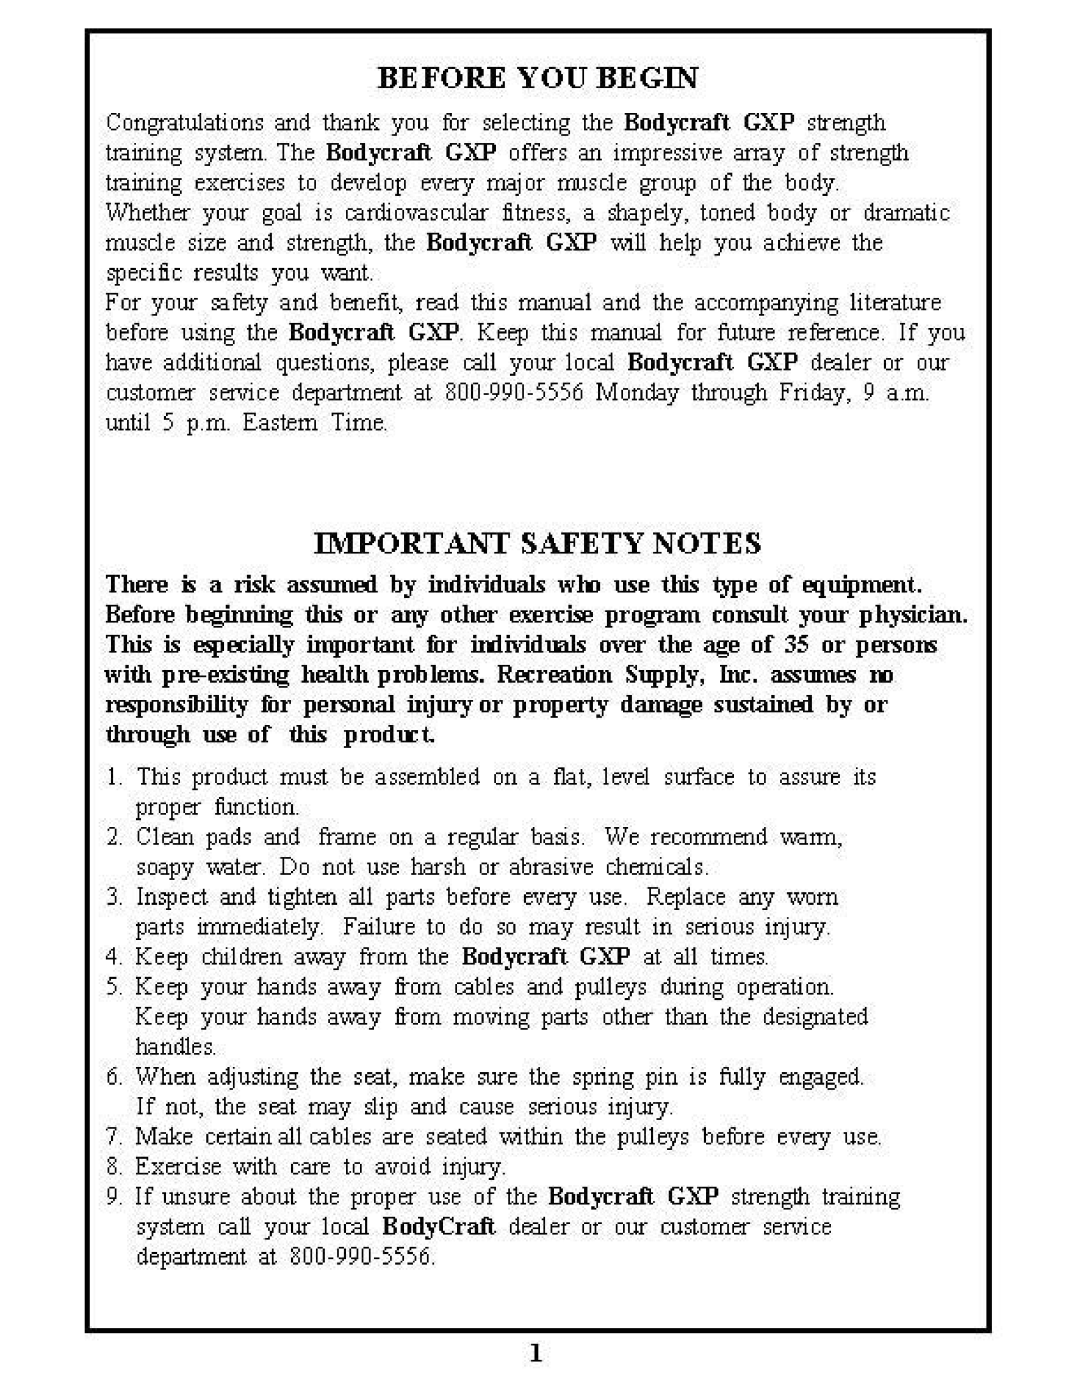 BodyCraft GXP manual Before You Begin, Important Safety Notes 